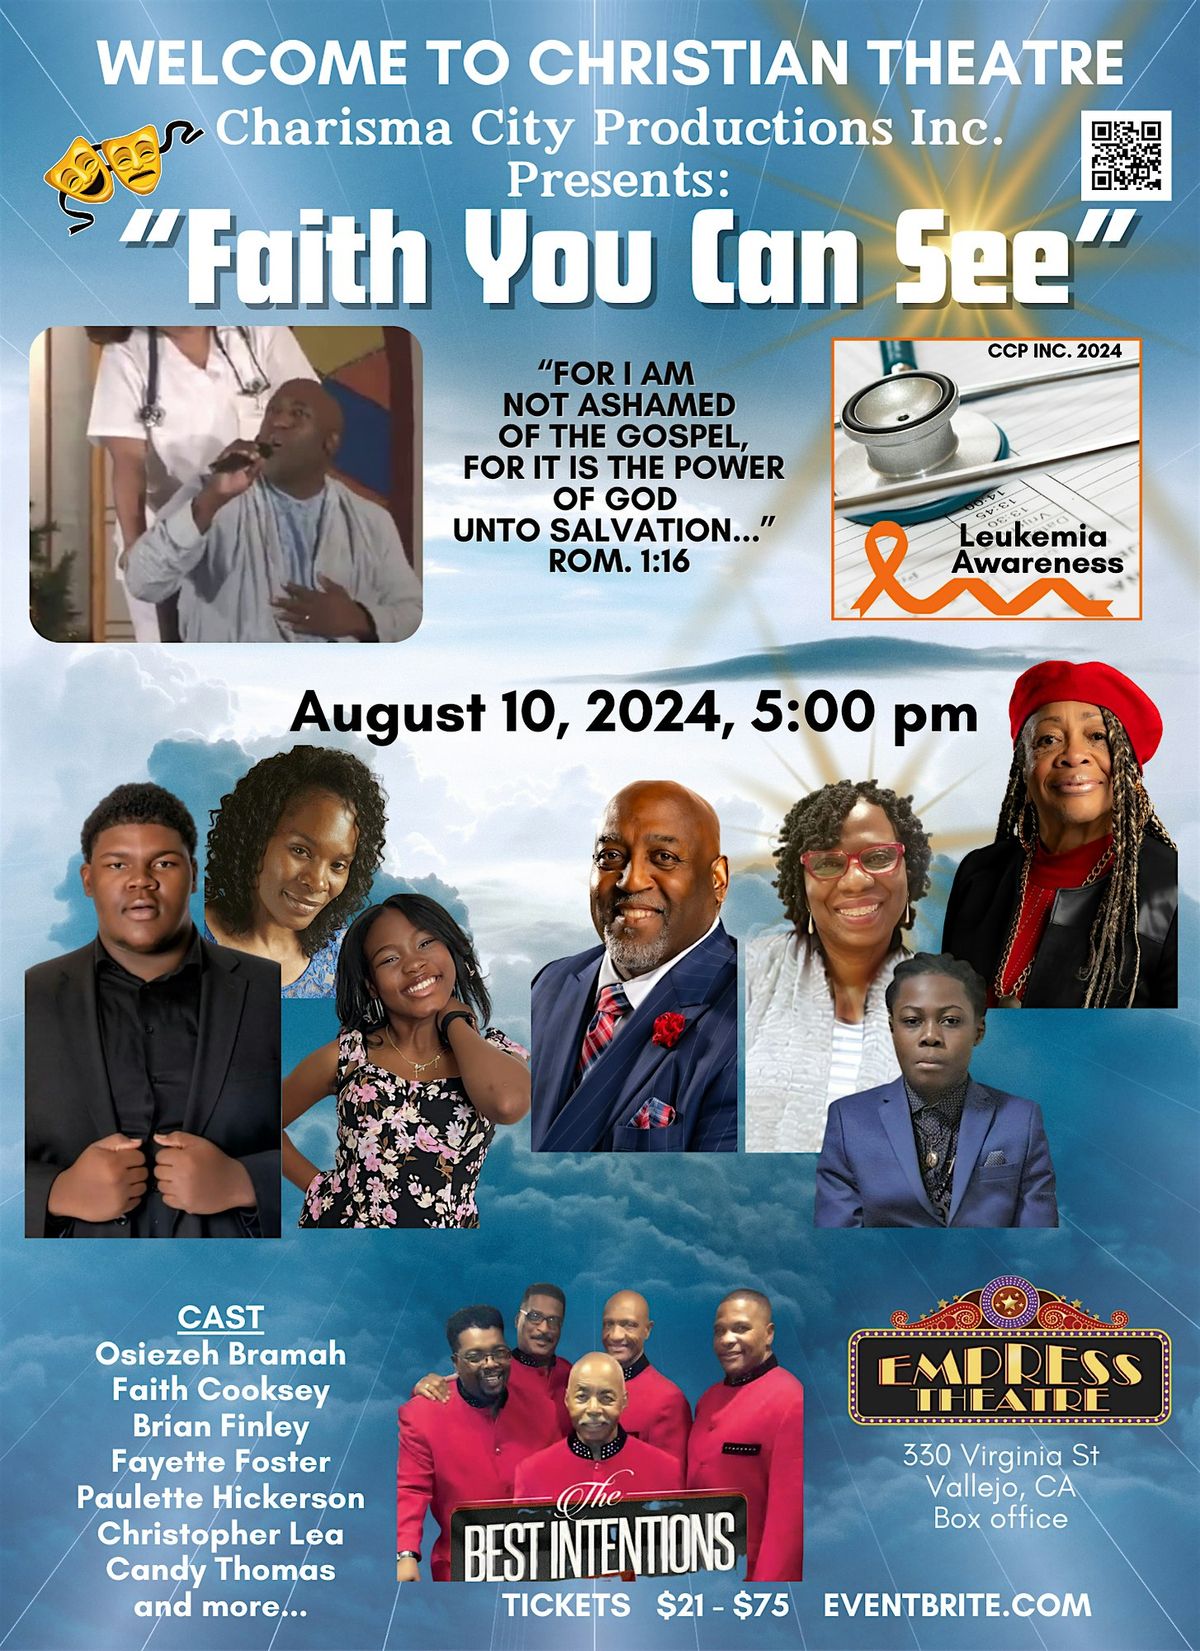 "FAITH YOU CAN SEE" - A Fresh New Gospel Play with loads of Dram-edy!